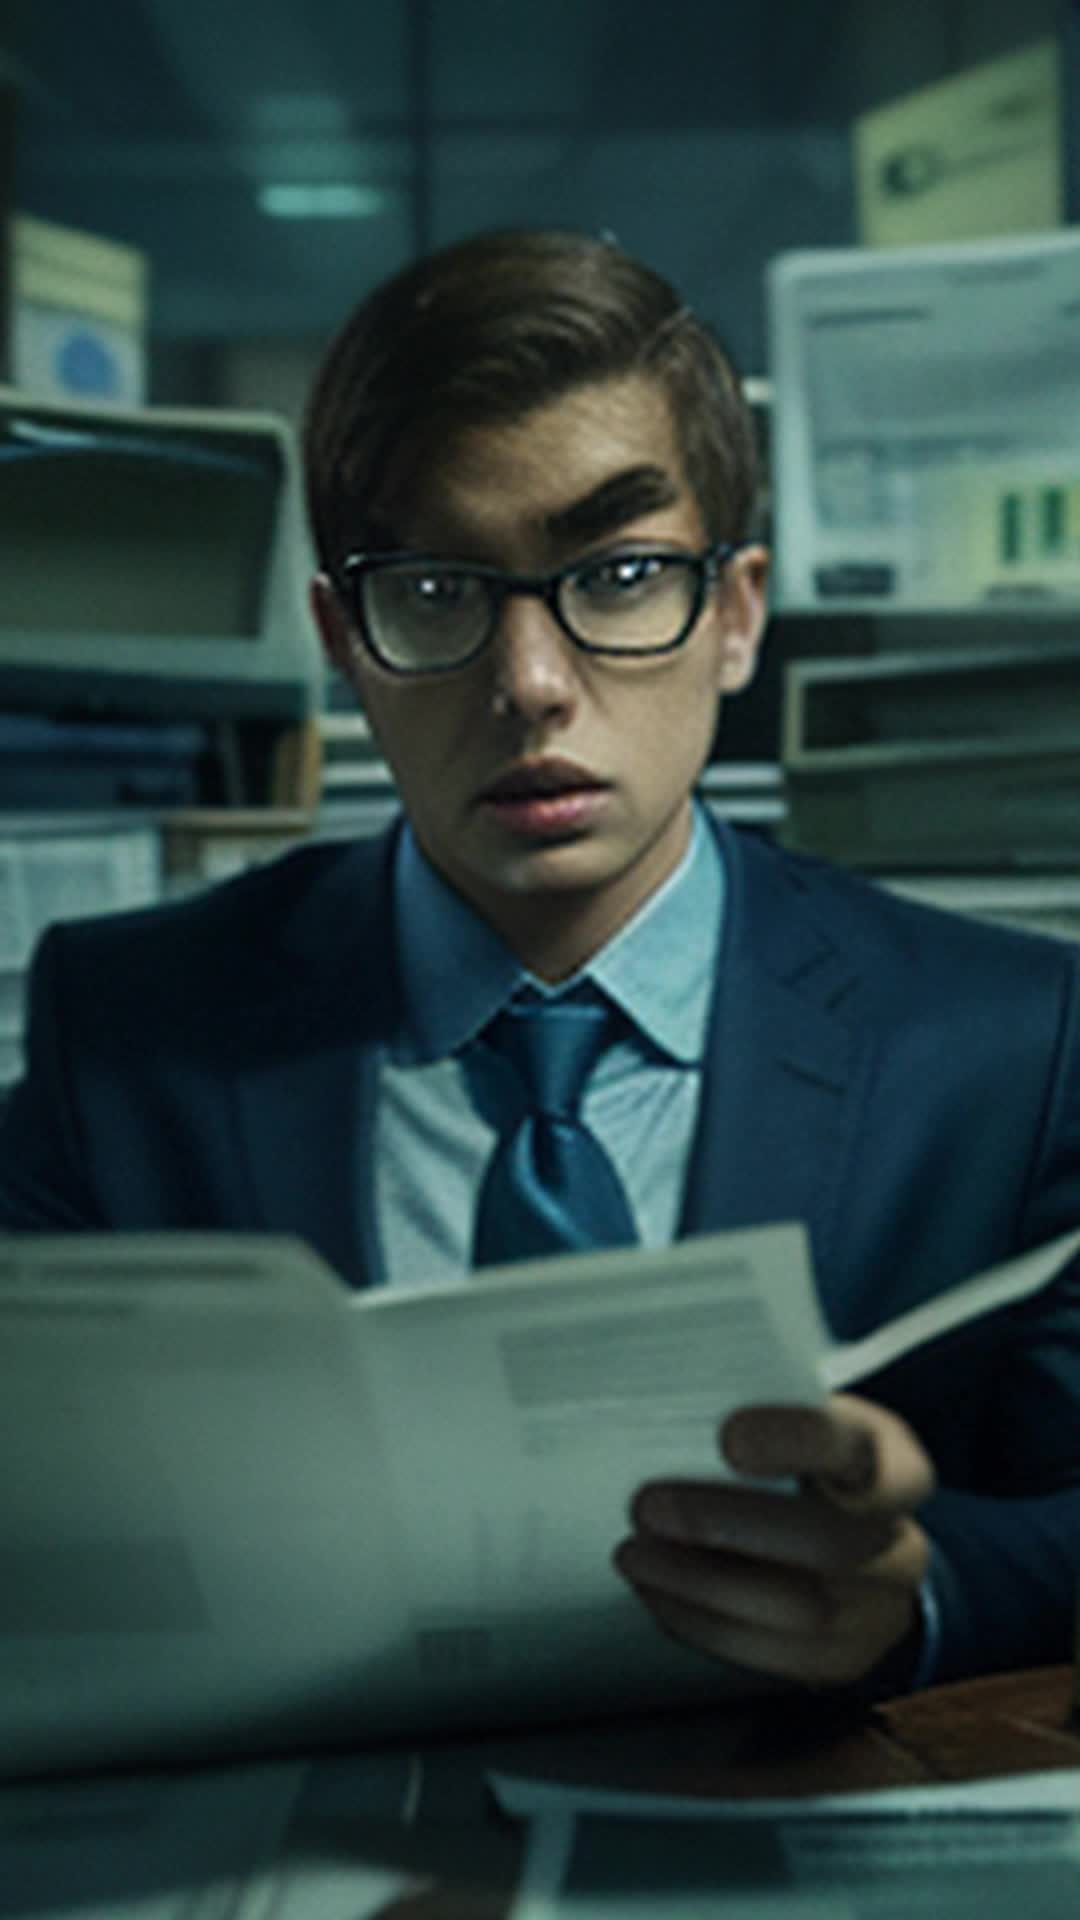 Young financial analyst, cramped office, gloomy light, poring over Federal Reserve records, fingers trembling, massive undisclosed bailout, eerie tension